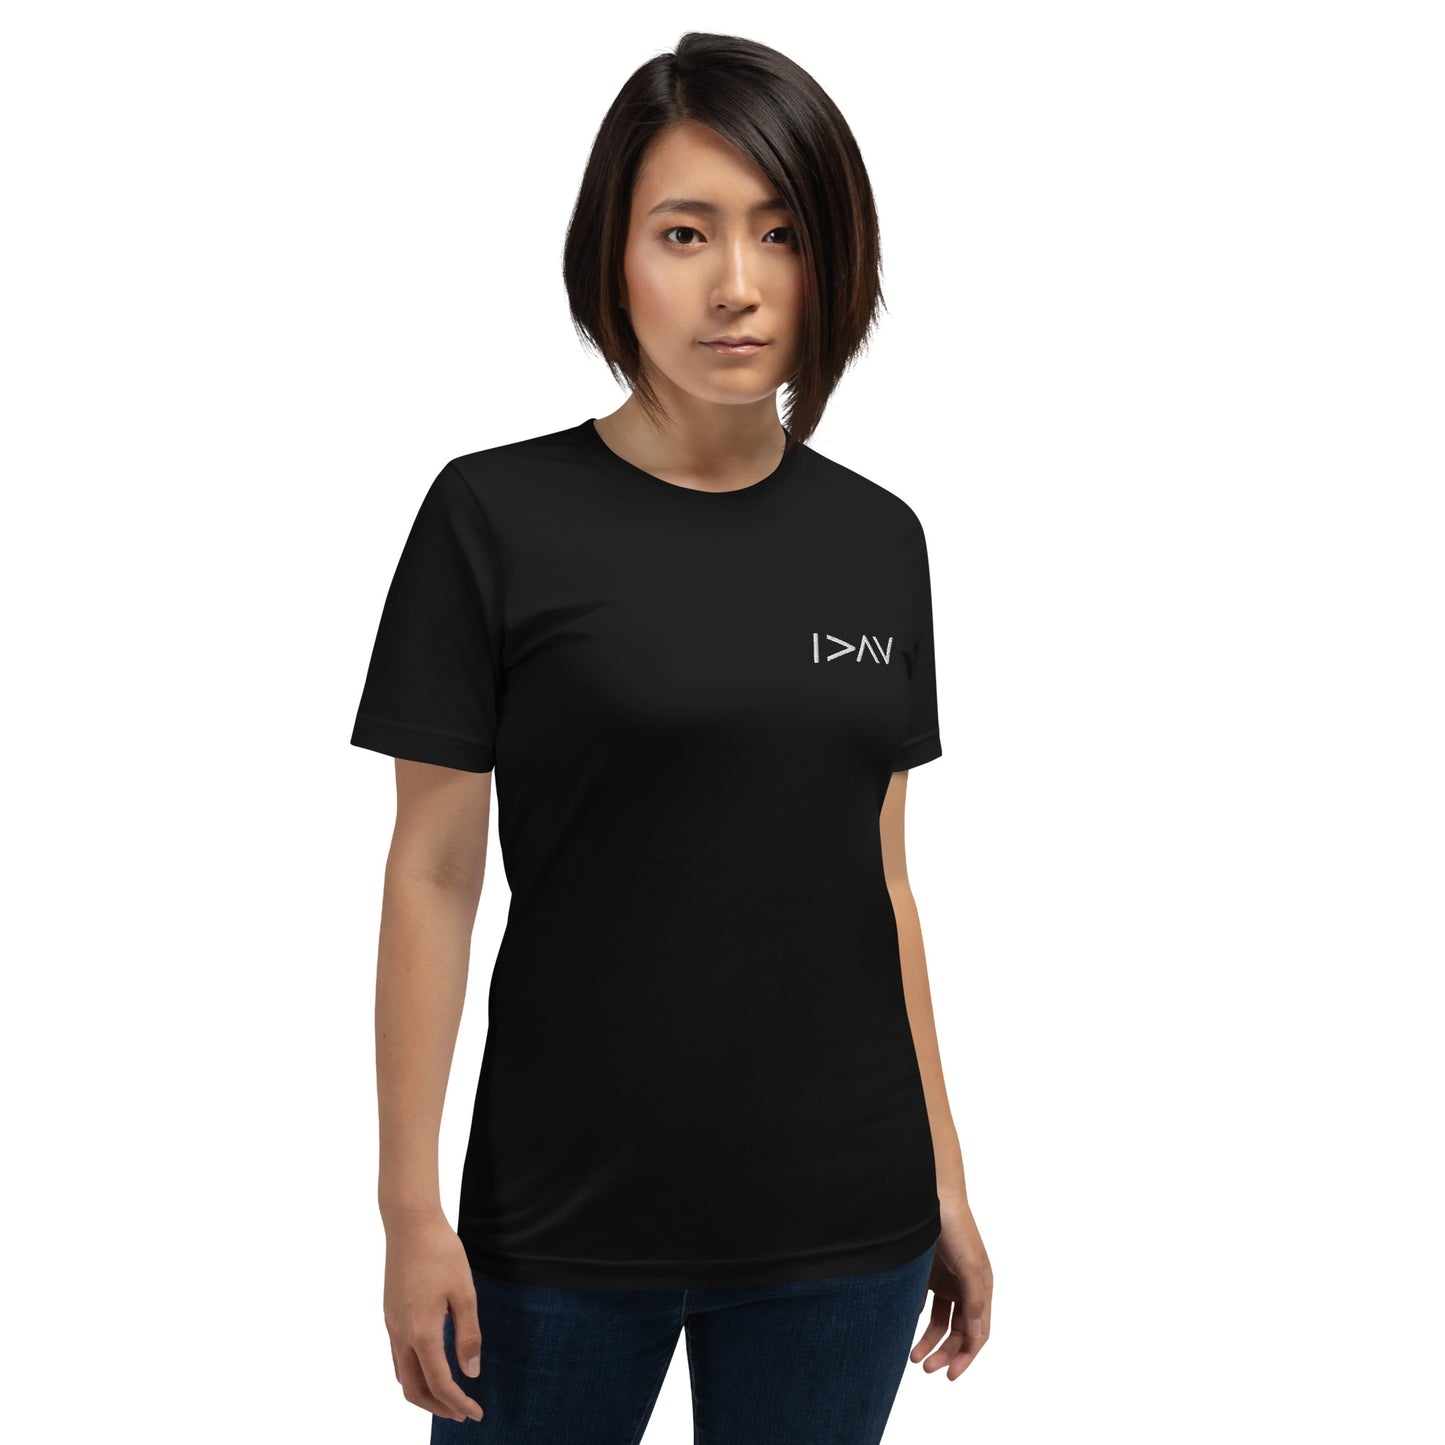 zwarte unisex t-shirt 'I am greater than my highs and lows'